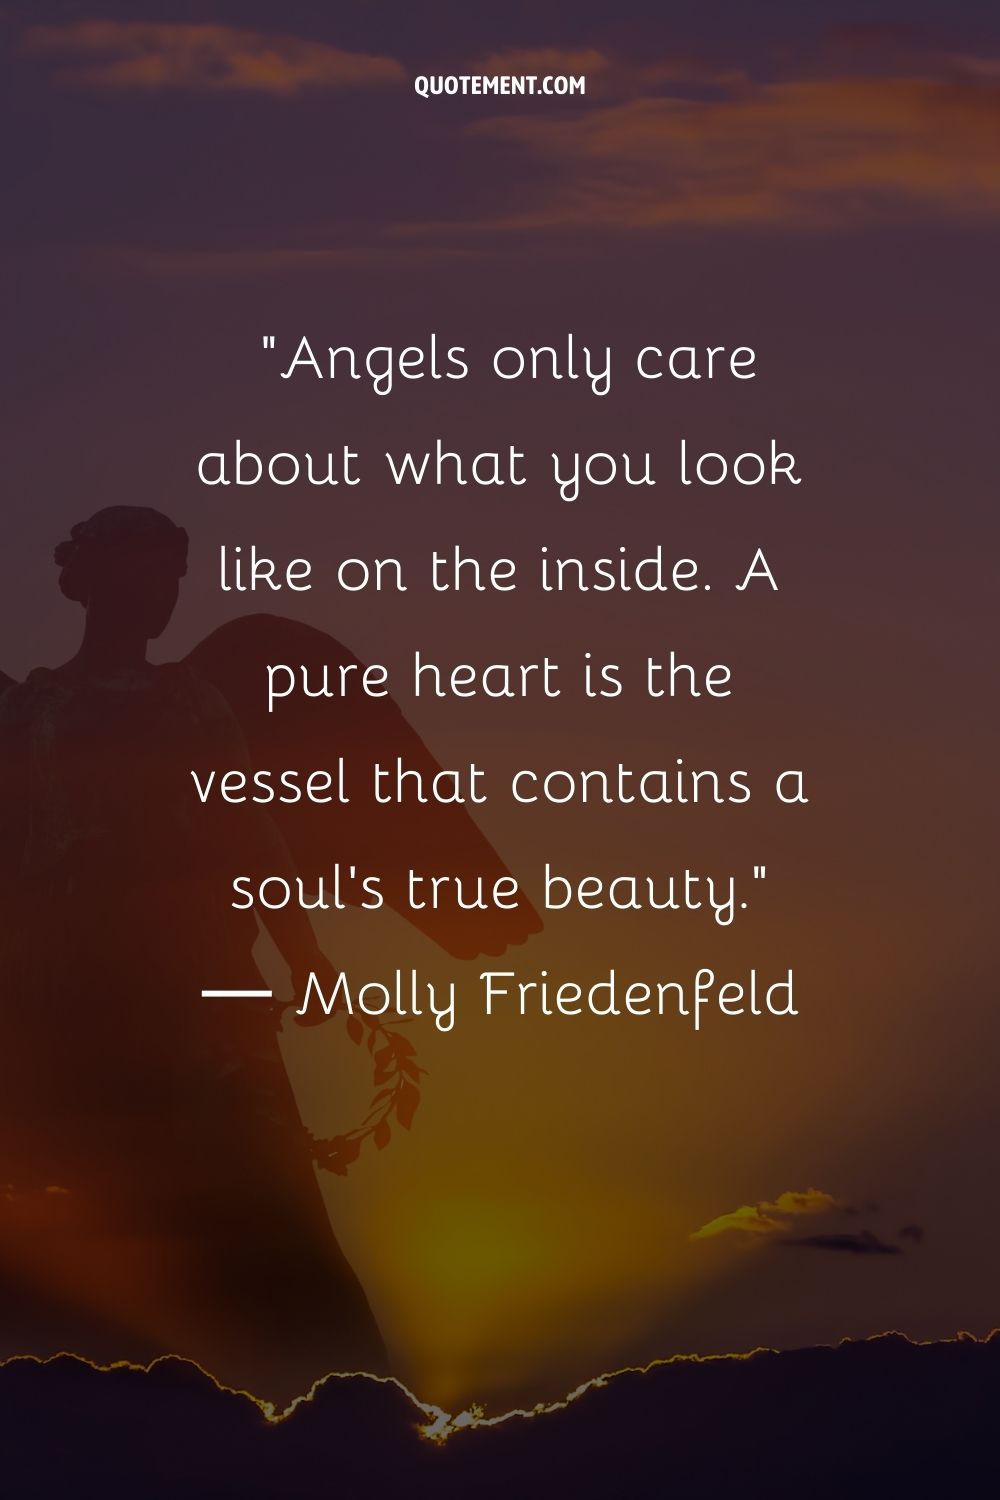 Angels only care about what you look like on the inside.